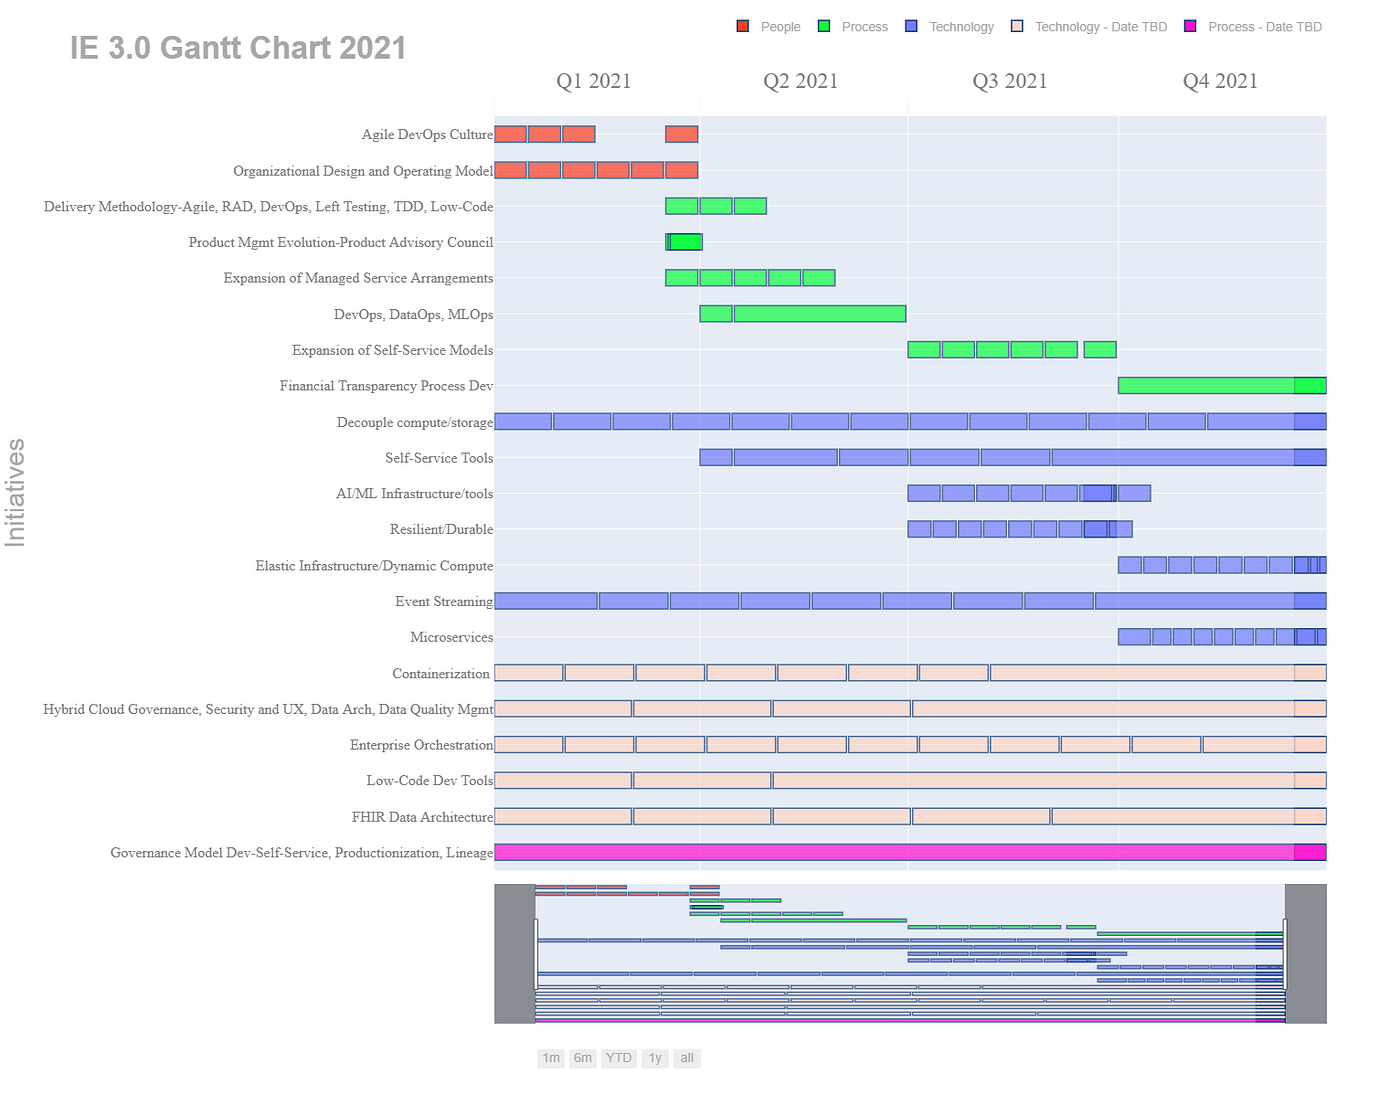 Gantt Charts in Python with Plotly | by Max Bade | Dev Genius